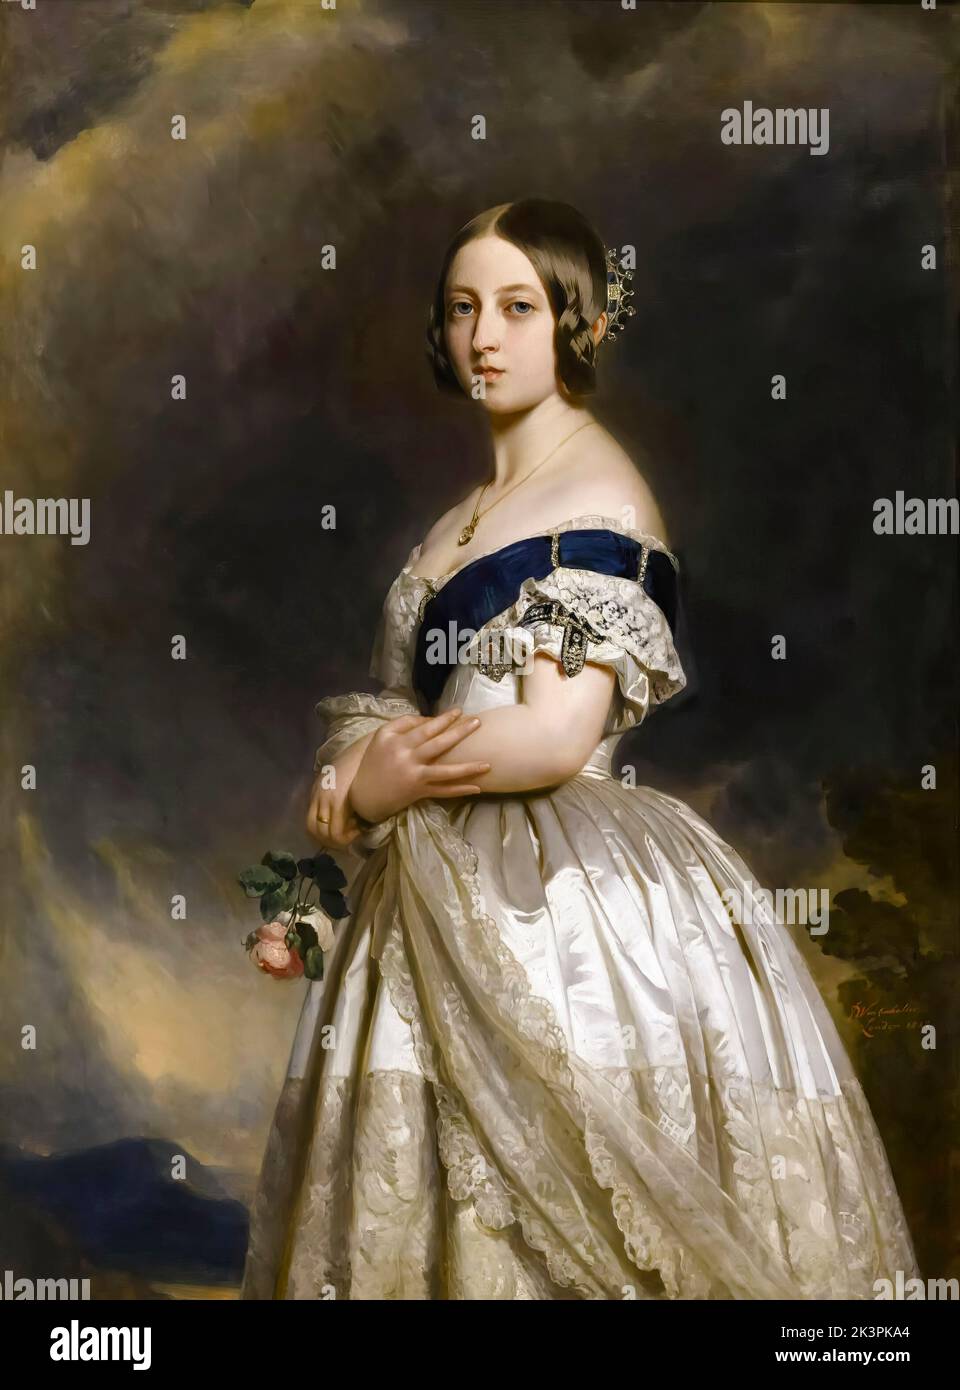 Queen Victoria (1819-1901) of the United Kingdom of Great Britain and Ireland (1837-1901) as a young woman in 1837, portrait painting in oil on canvas by Franz Xaver Winterhalter, 1842 Stock Photo